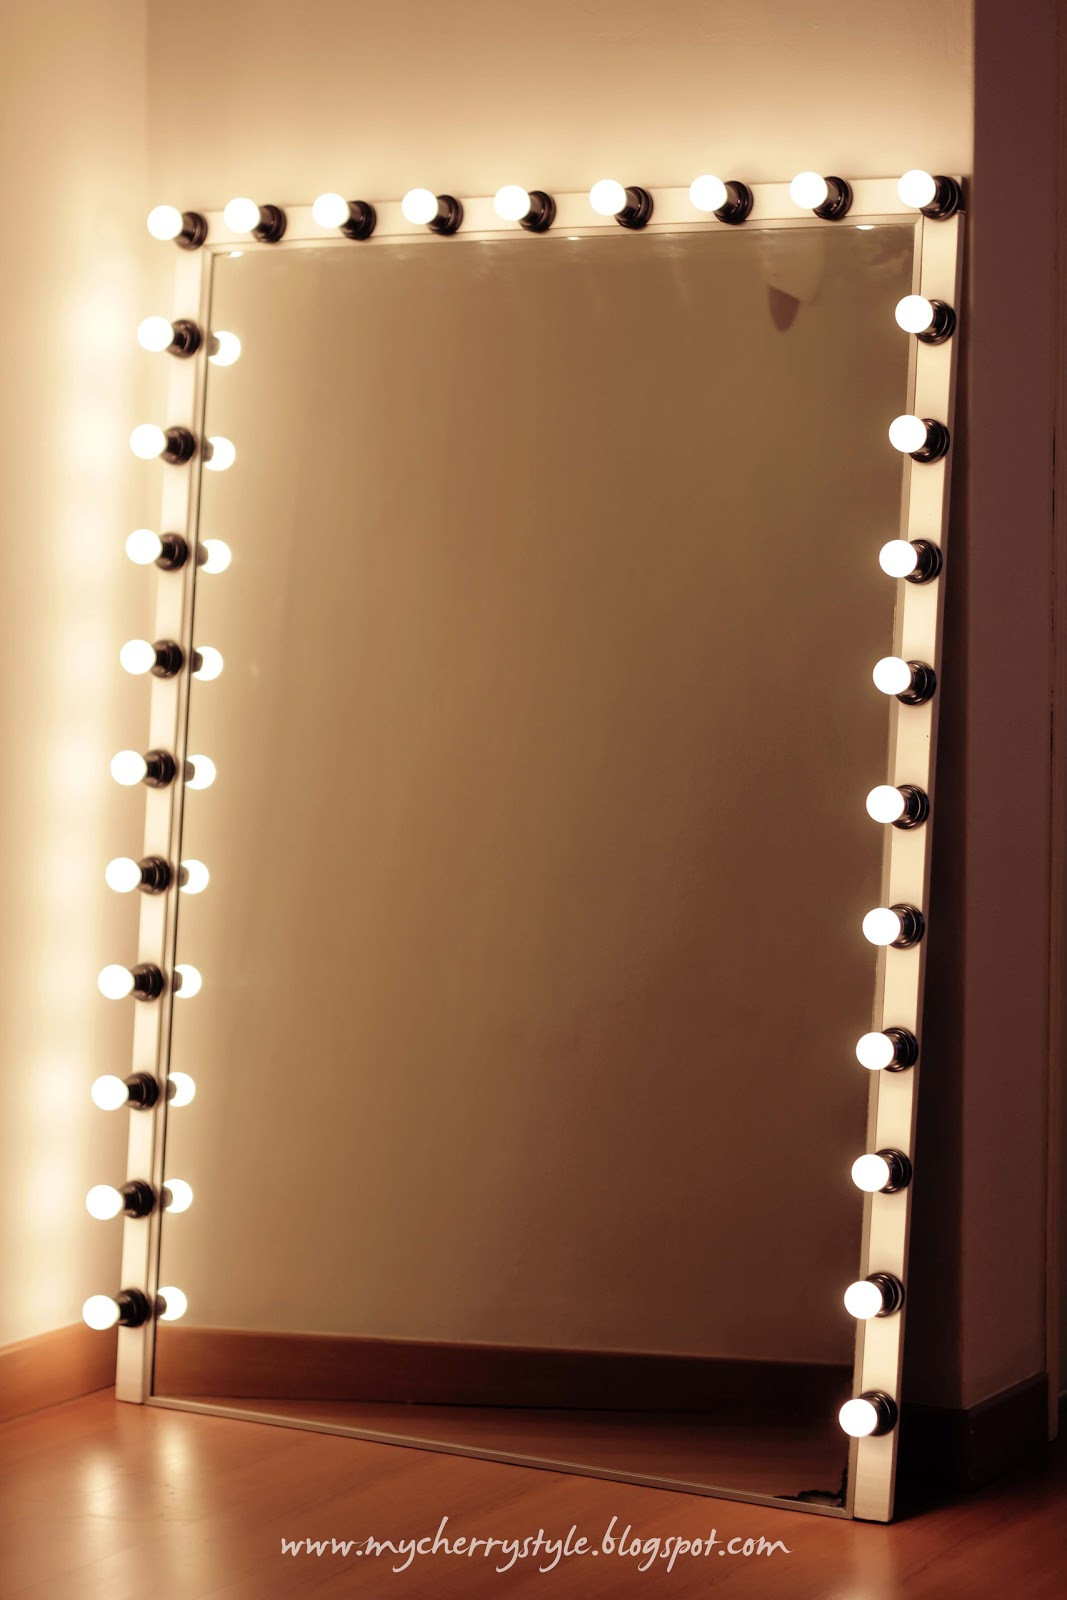 DIY Hollywood Mirror
 DIY Hollywood style mirror with lights Tutorial from